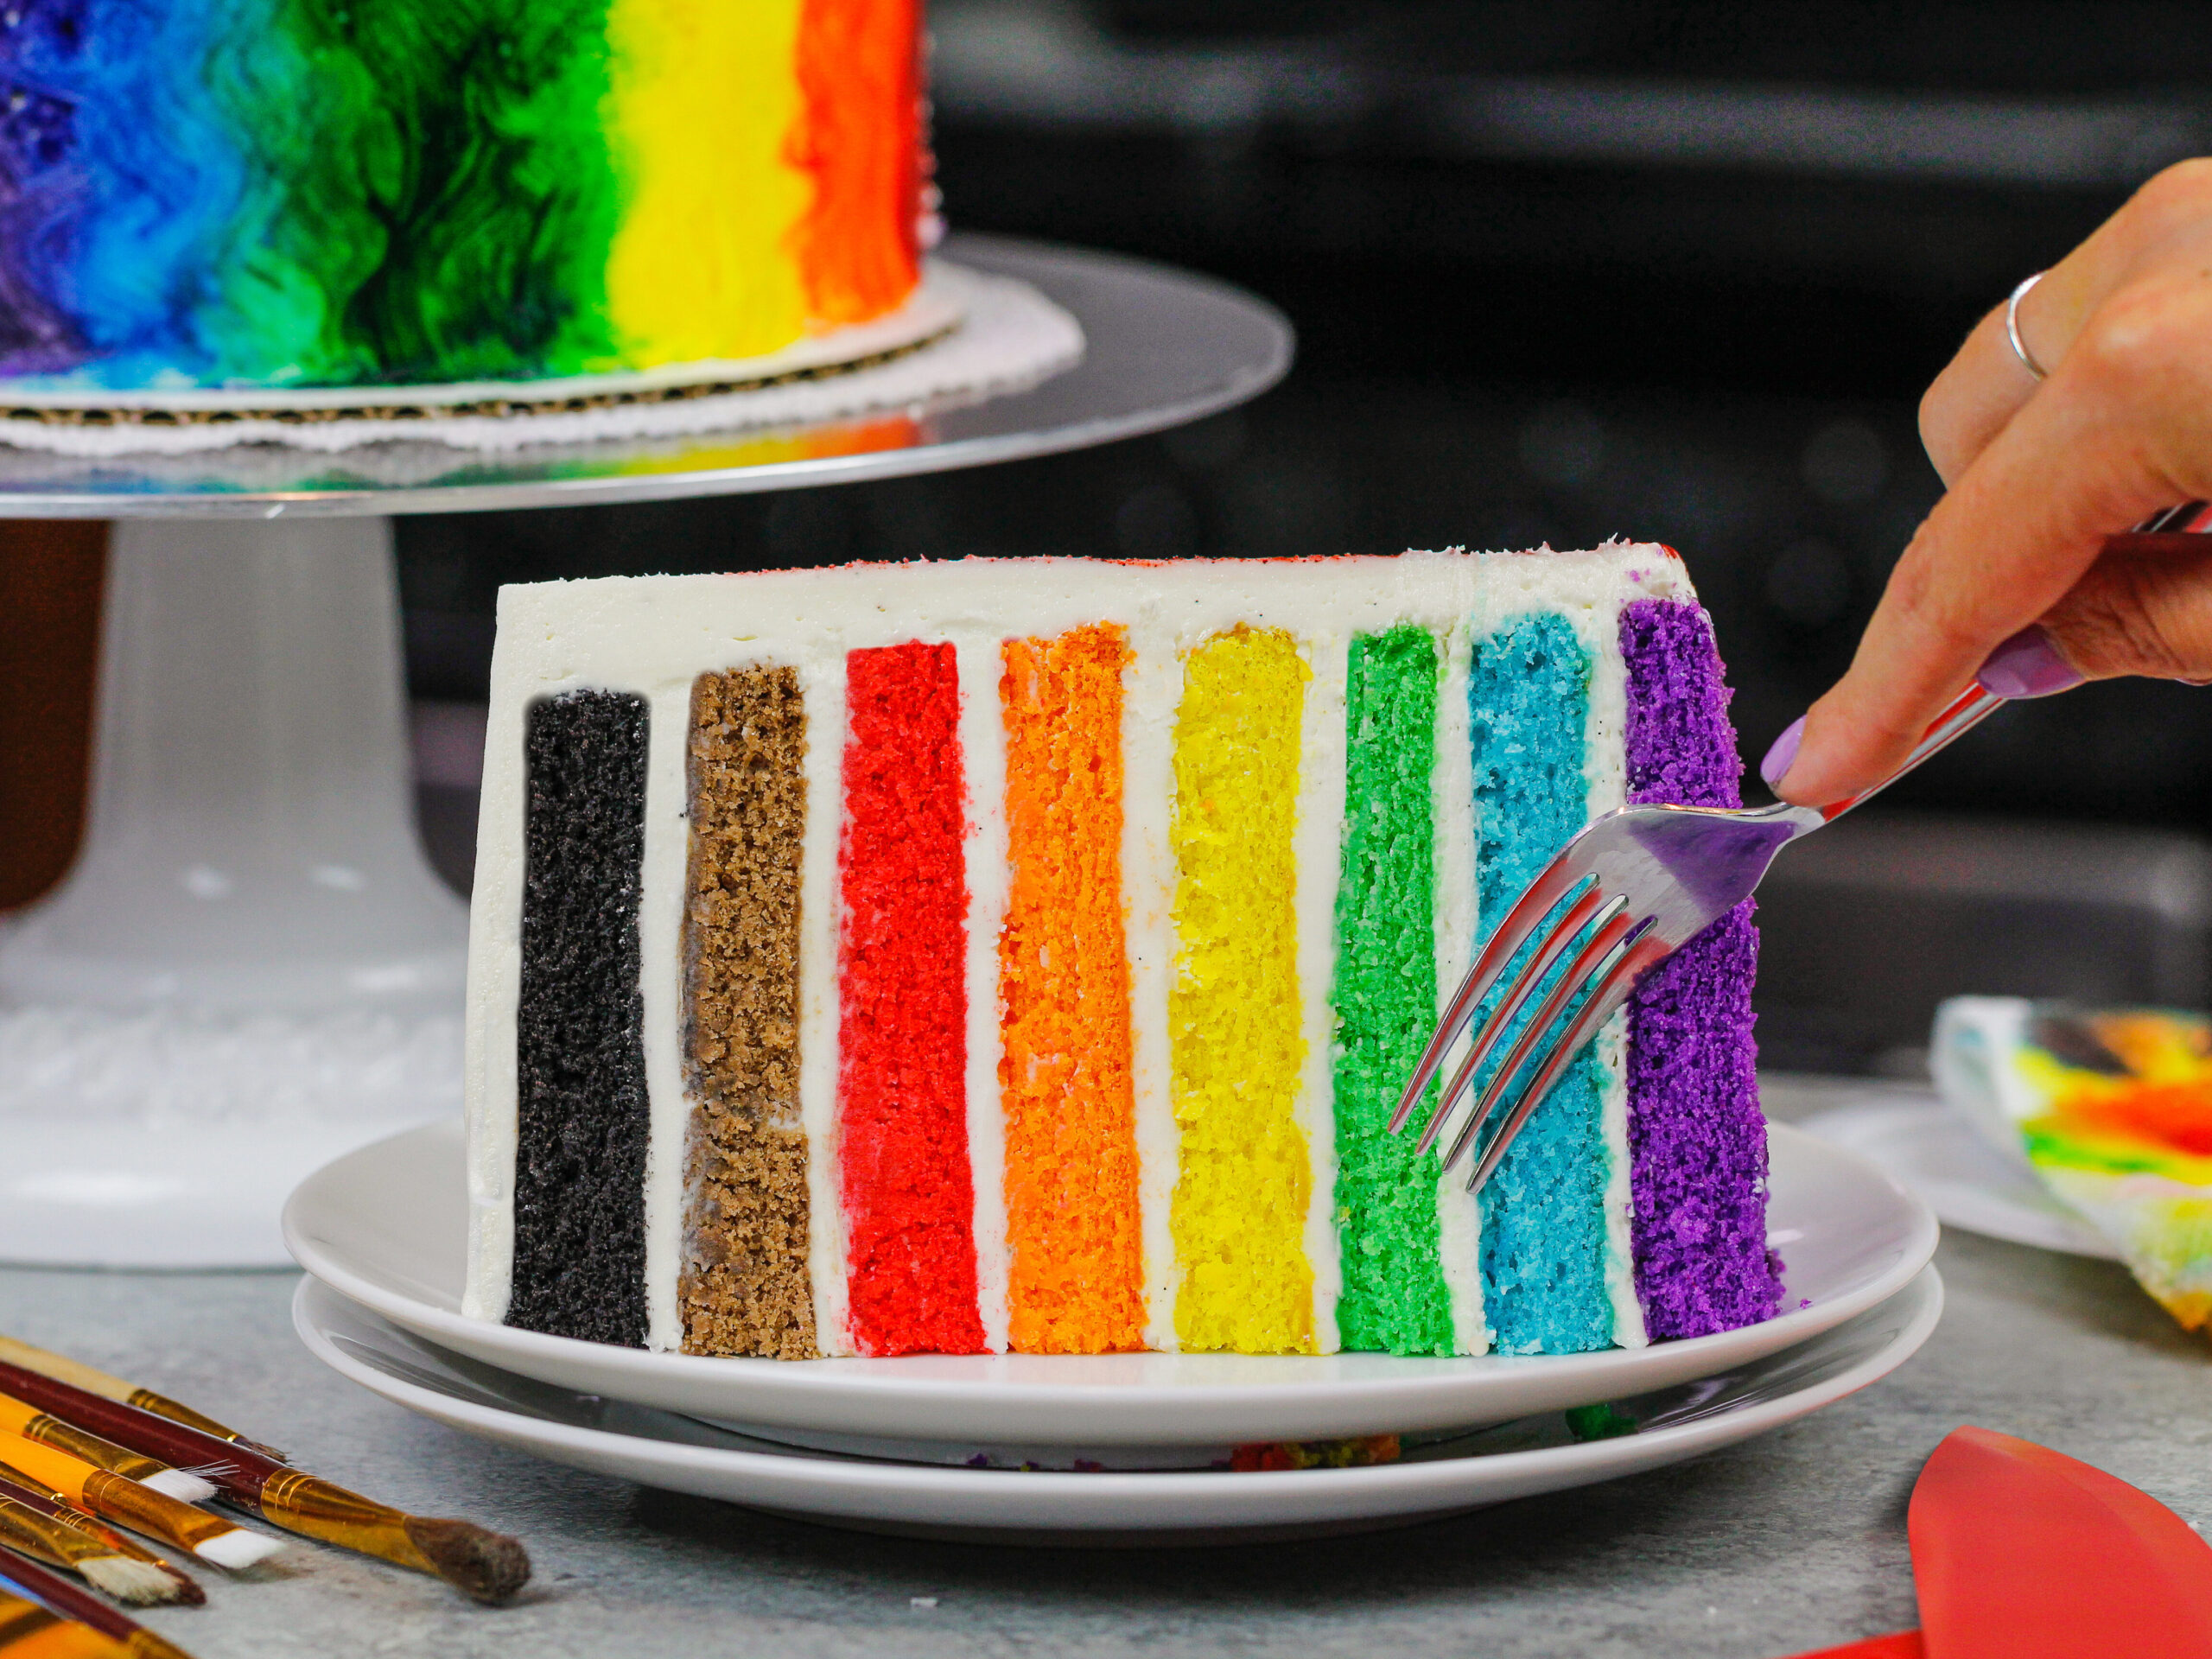 image of rainbow pride cake based on the updated LGBTQ rainbow flag which includes the colors brown and black for inclusivity